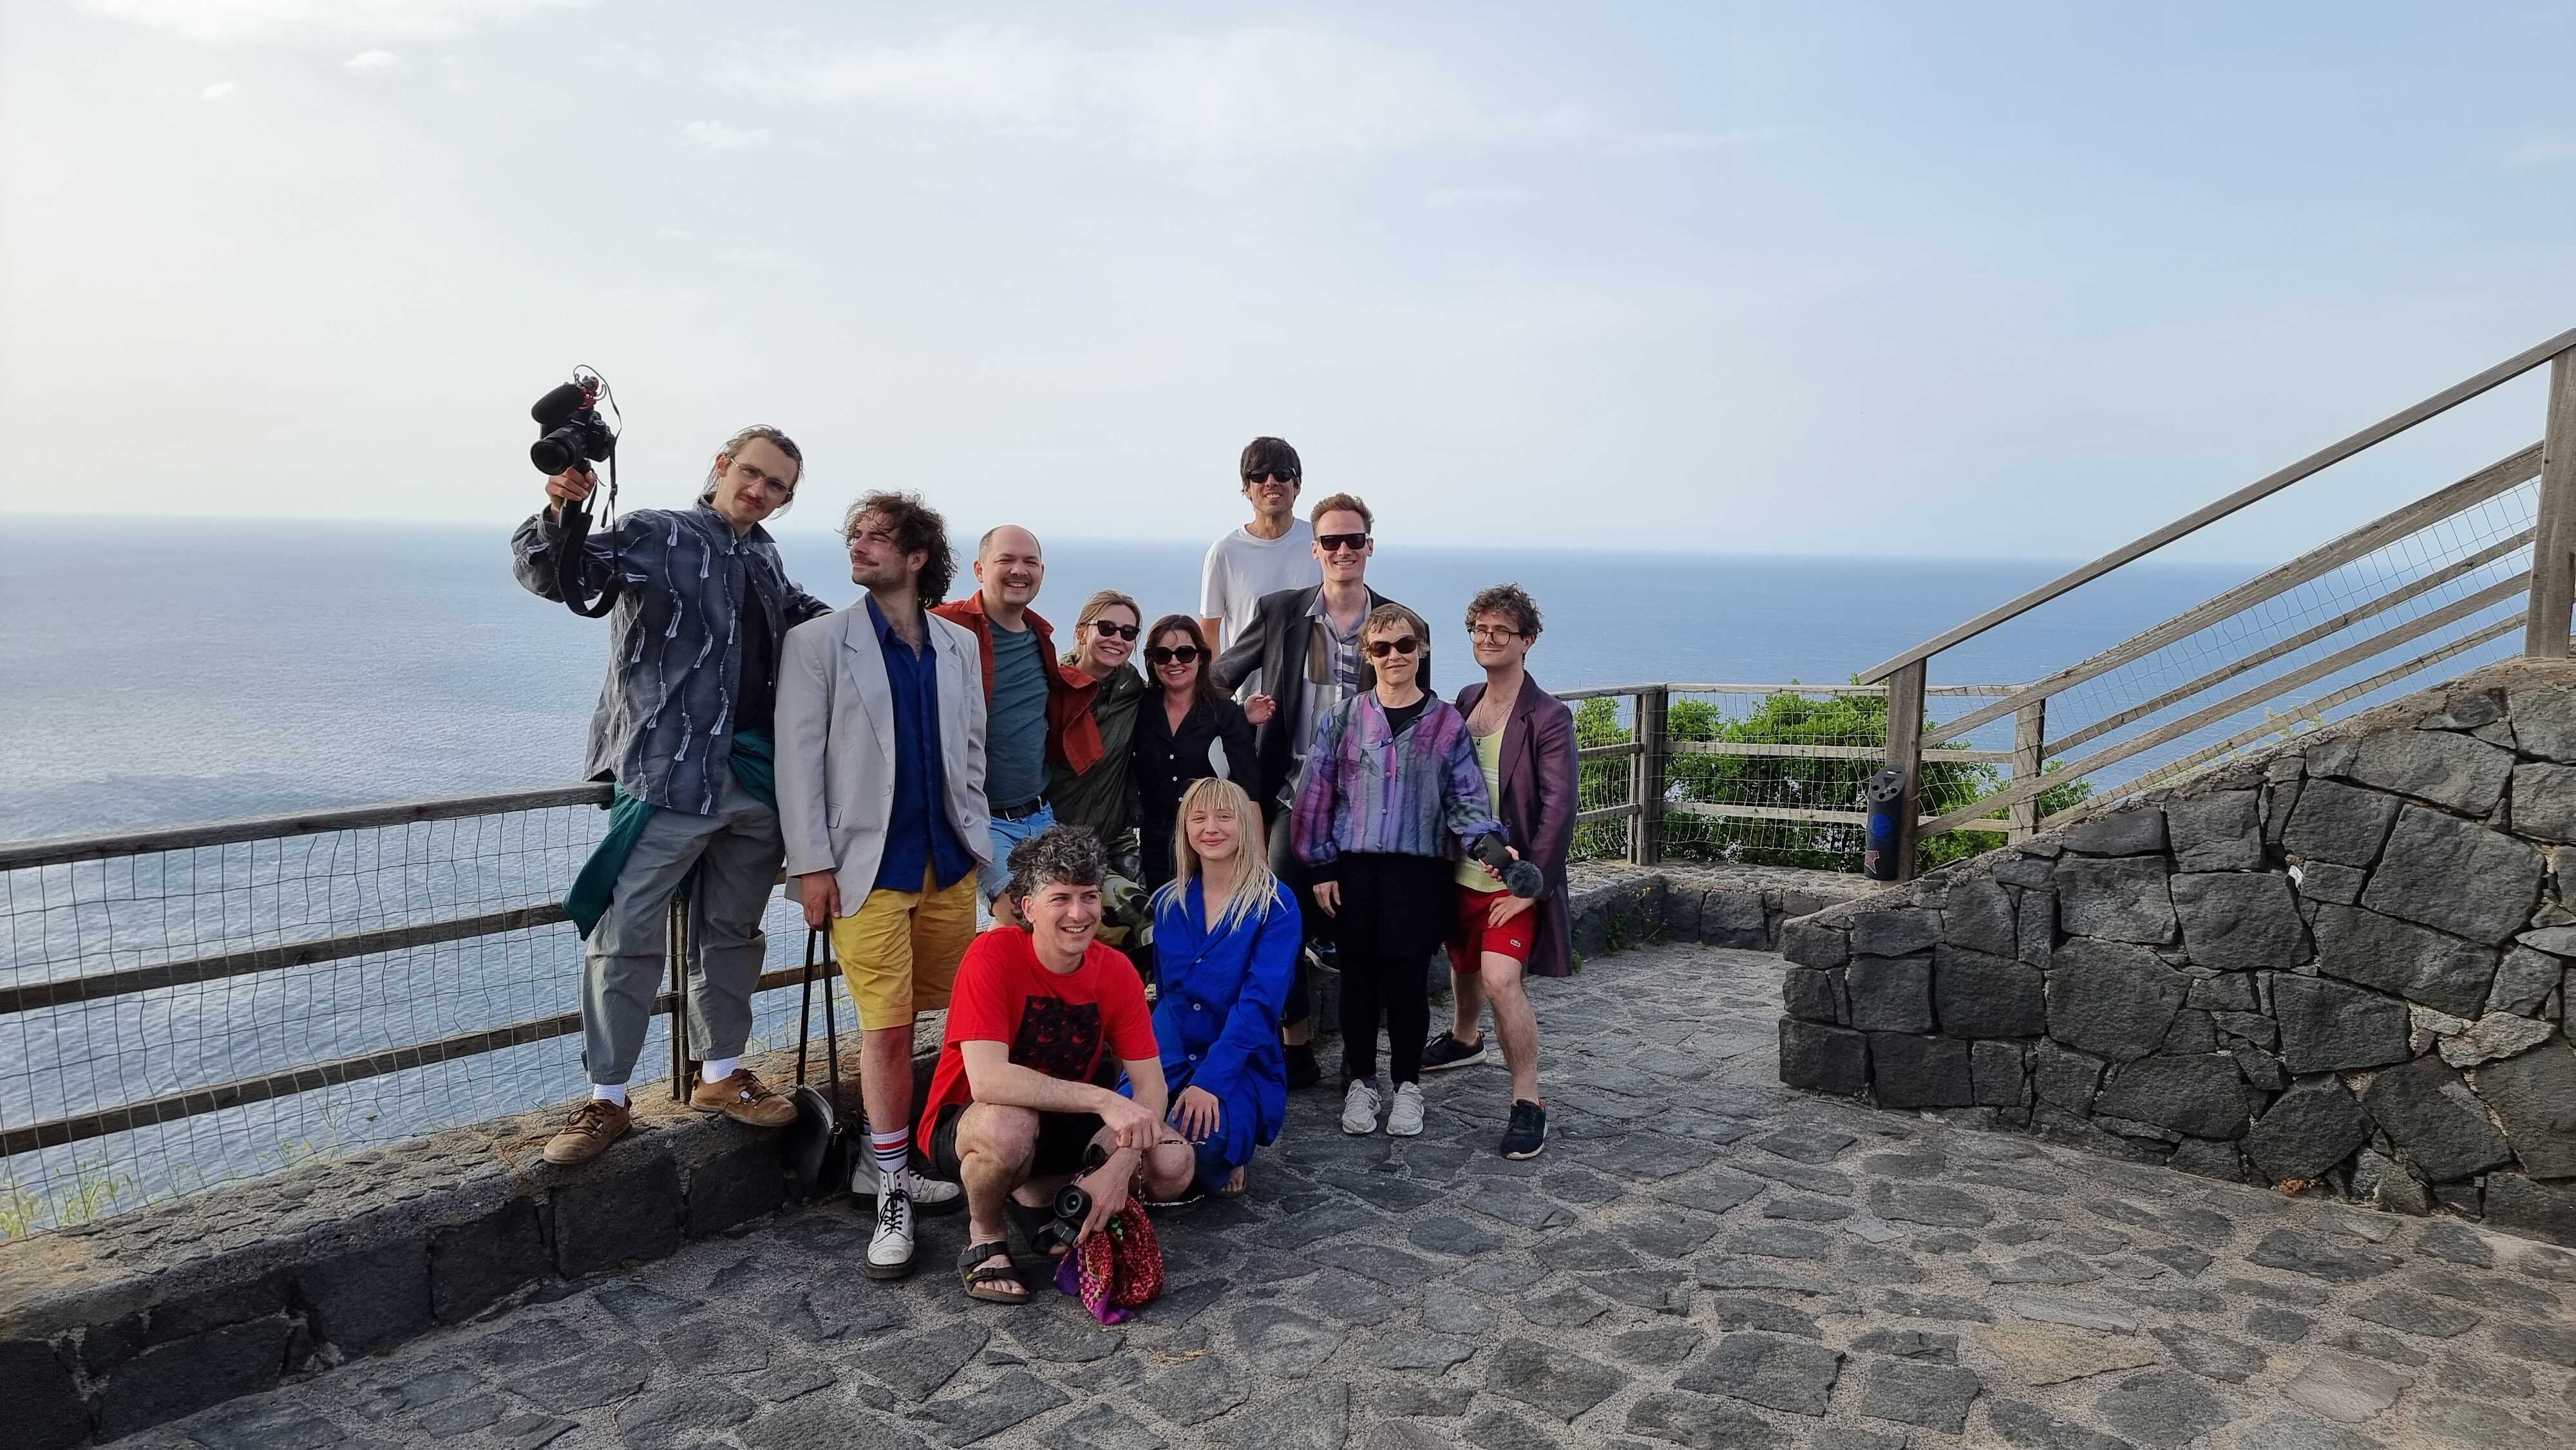 In Between student-led sessions, a group photo for Tomer. Photo credit: Till Langschied. Salina, May 2023.